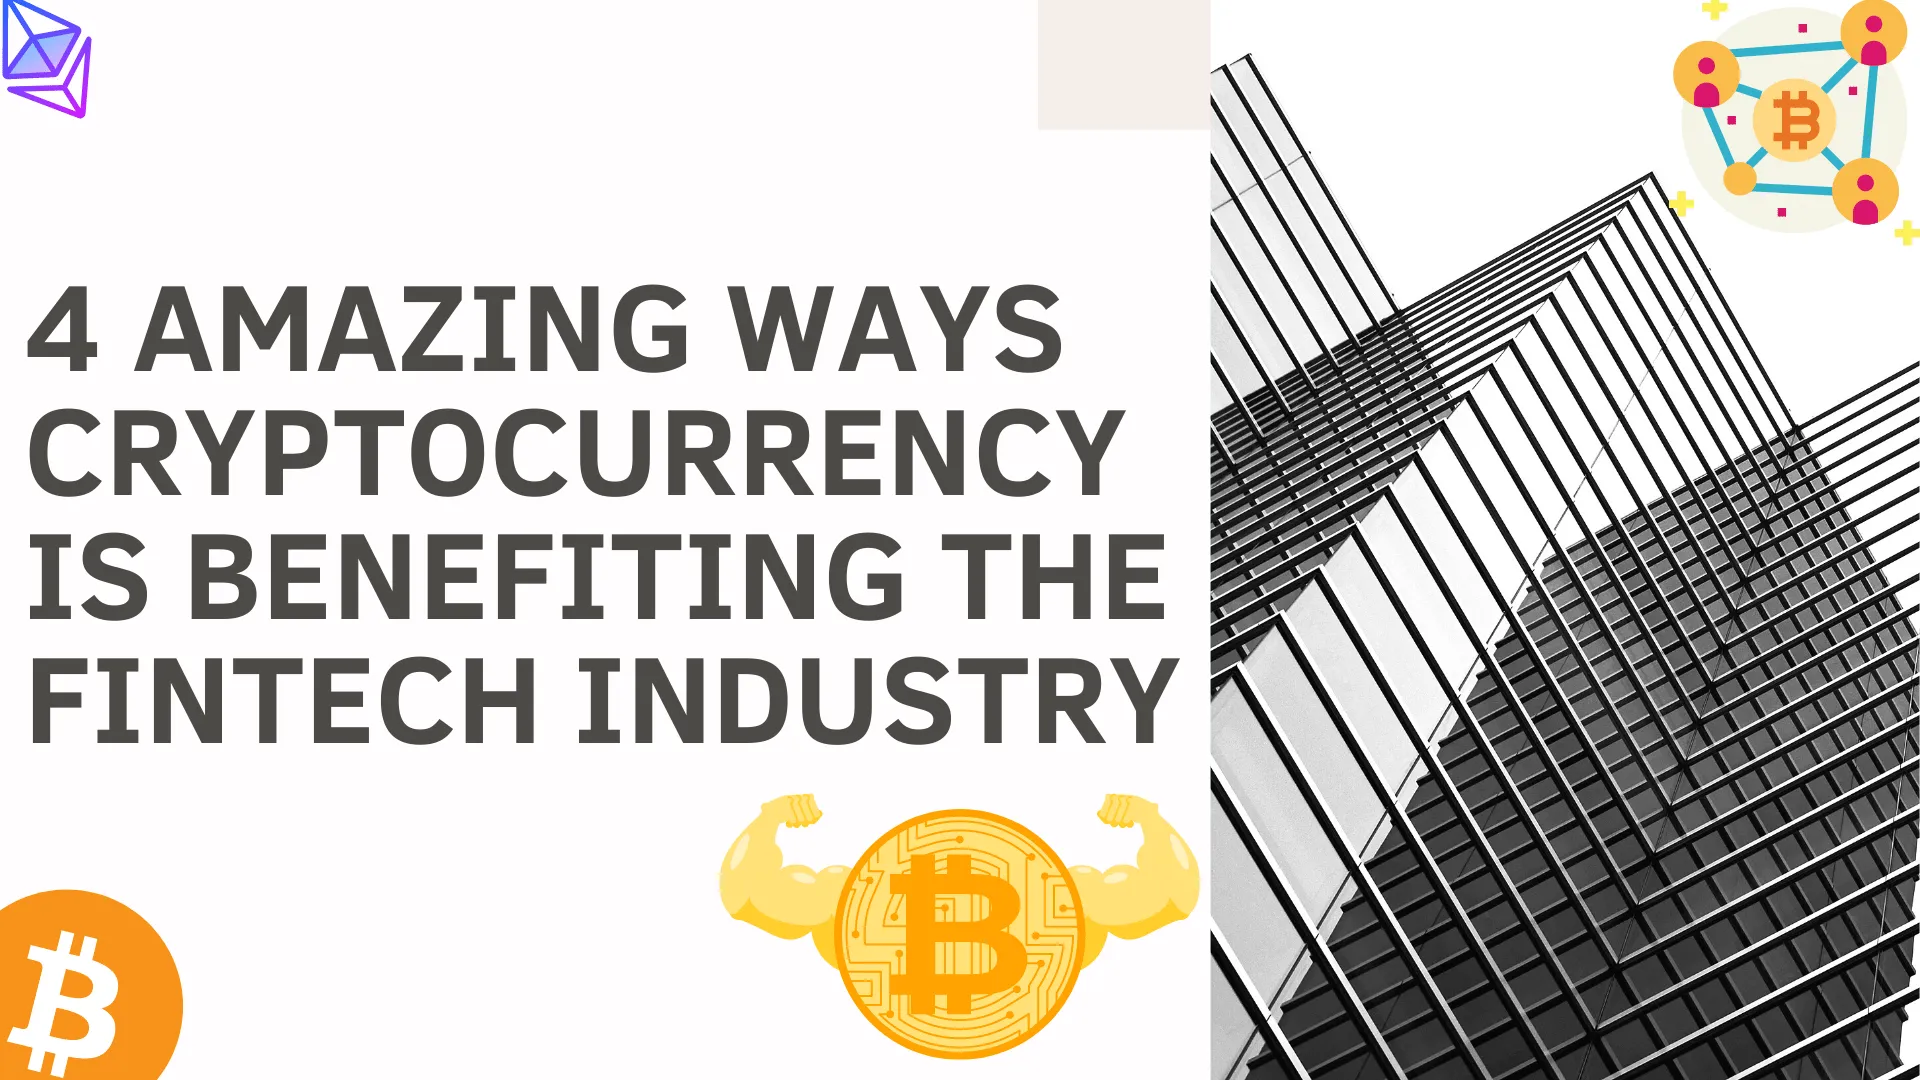 4 Amazing ways Cryptocurrency is Benefiting the Fintech Industry